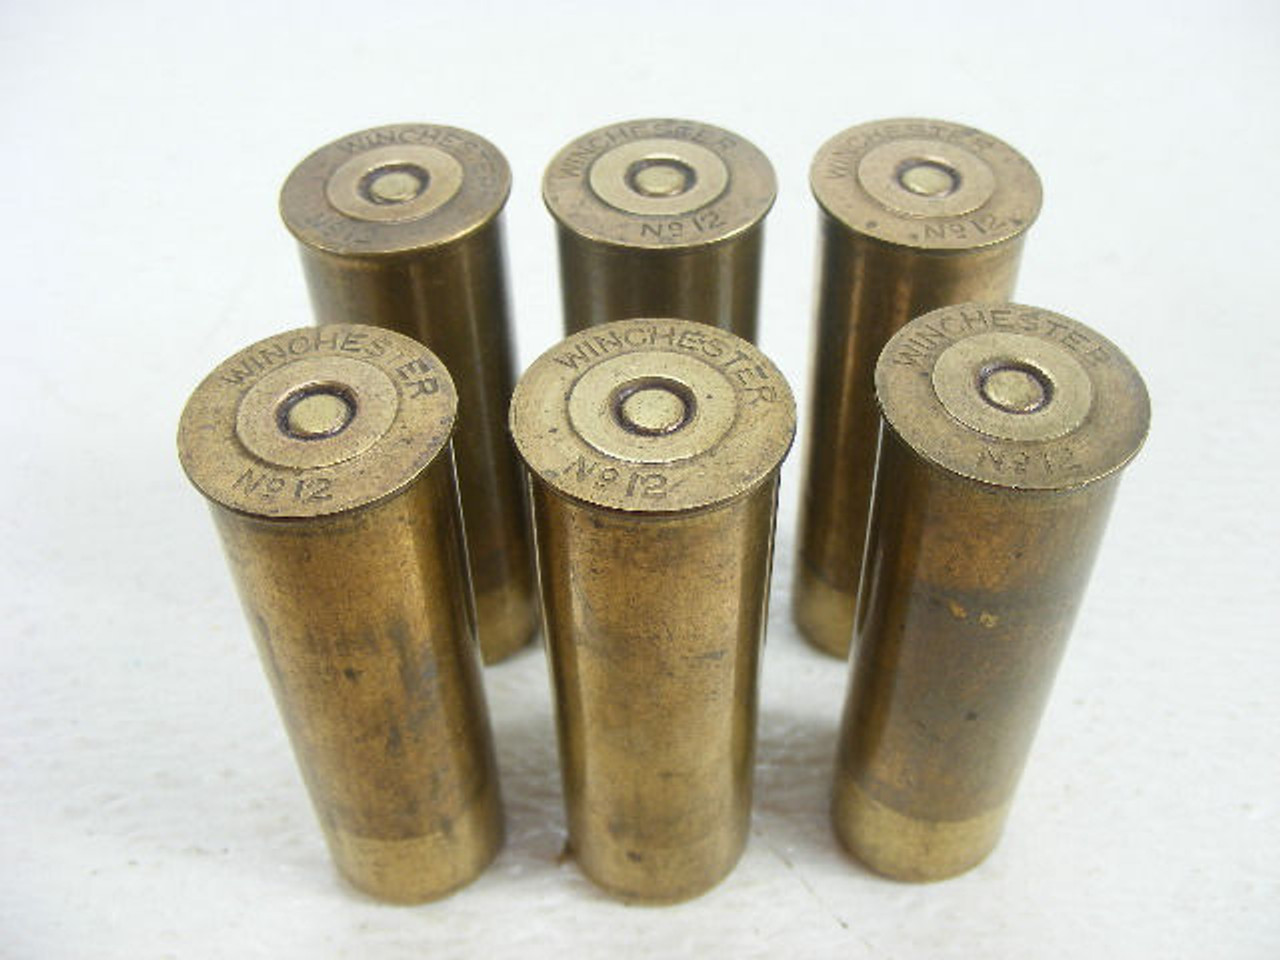 These are loaded antique Winchester brass shotgun shells in 12